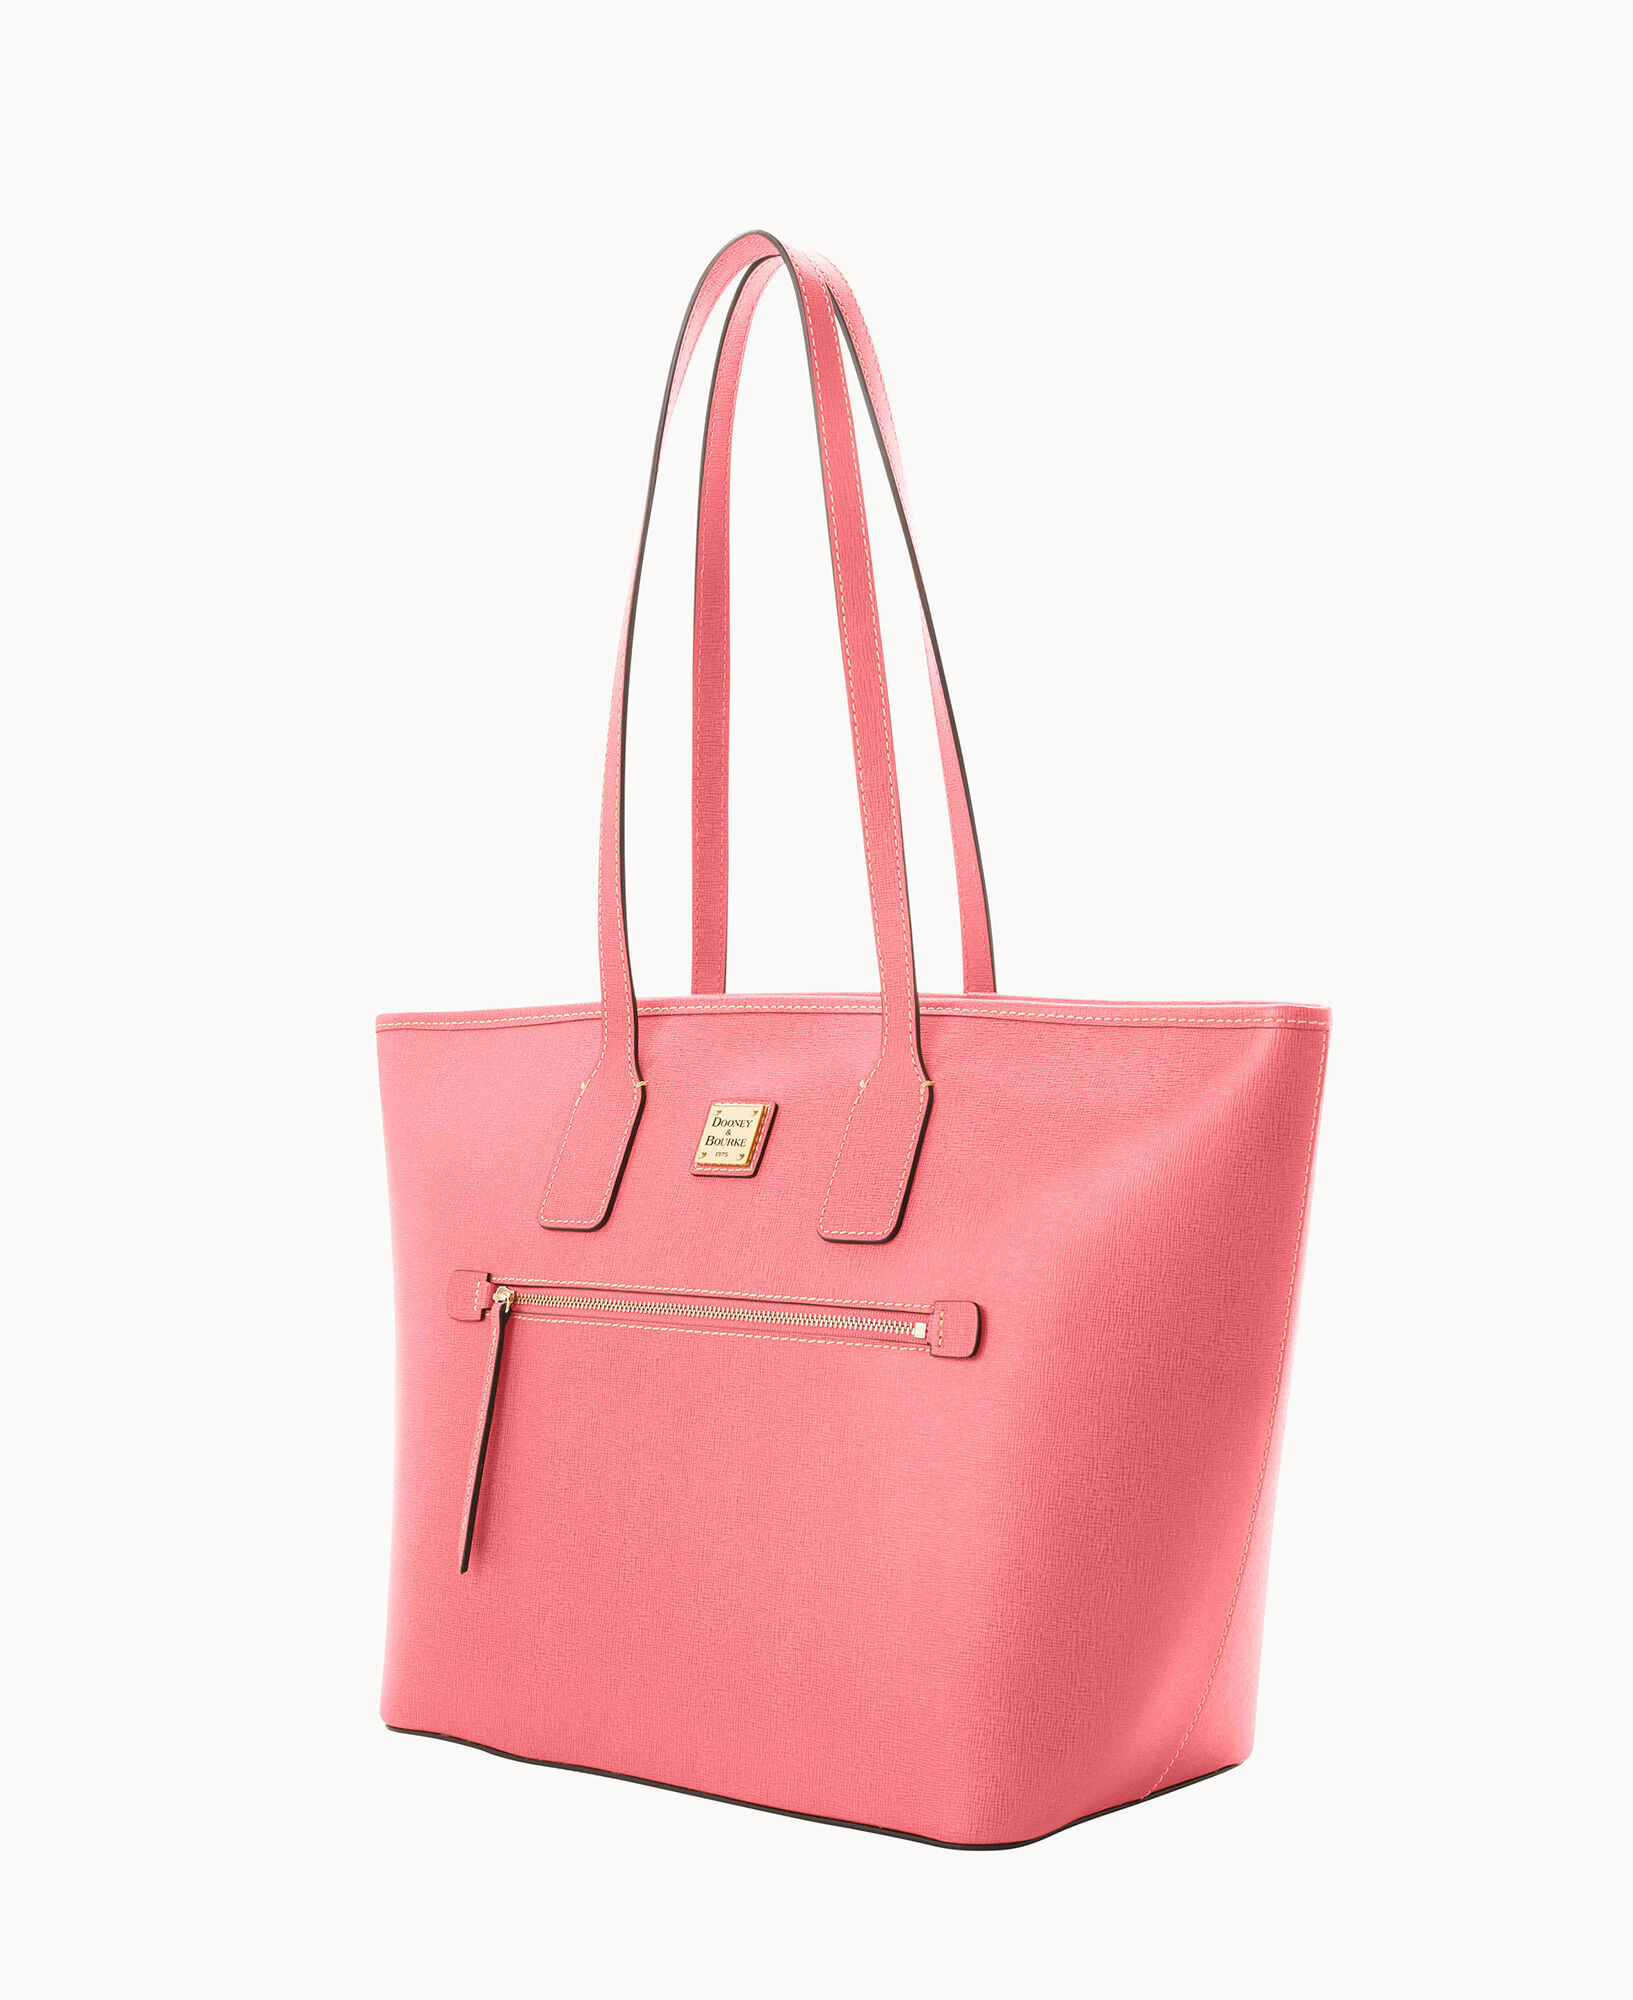 Shop The Saffiano Collection - Bags at Prices You Love